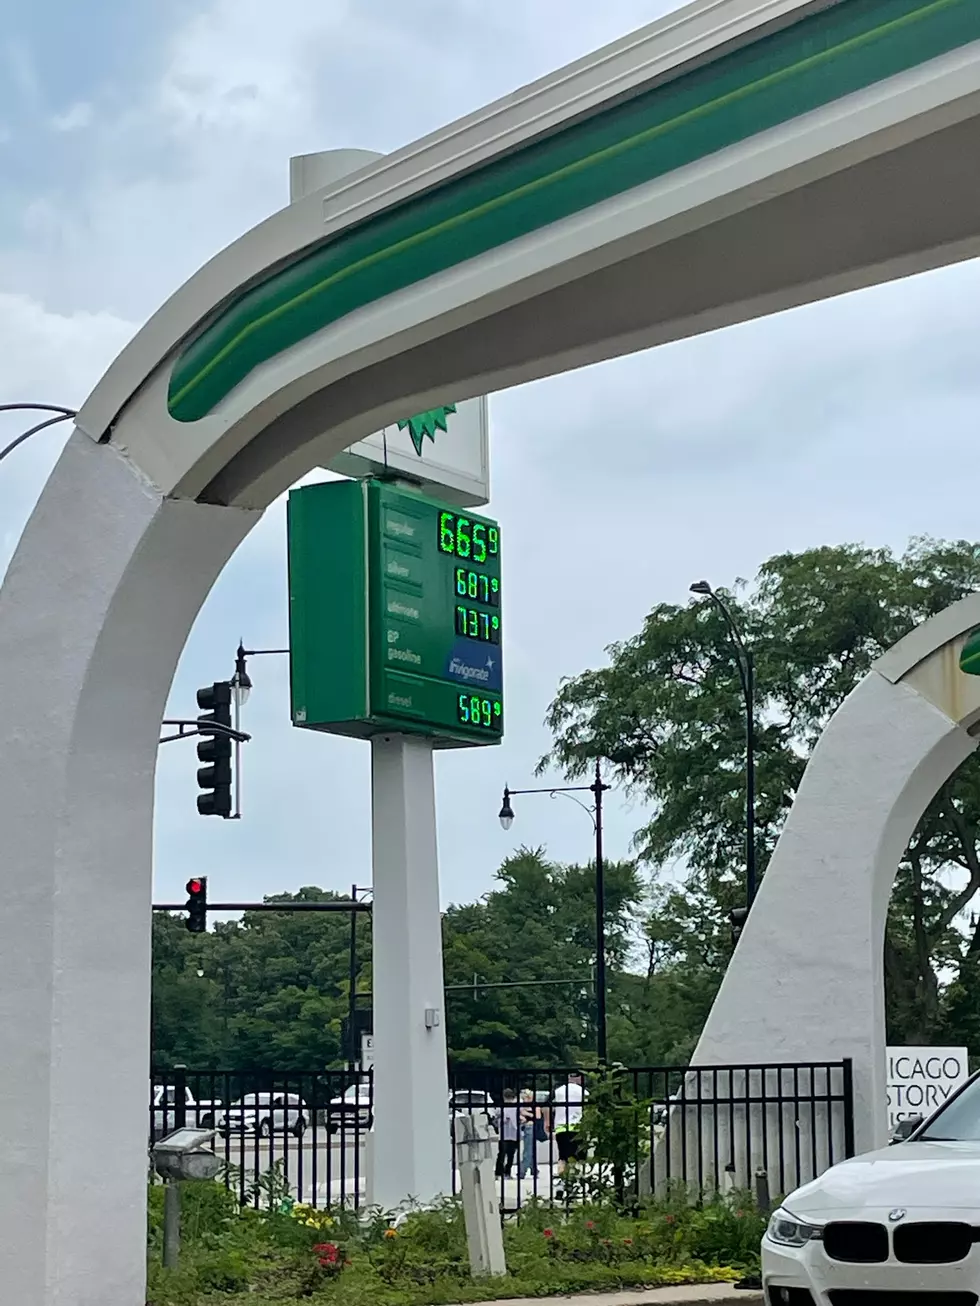 Are These Gas Prices From Chicago, A Glimpse of the Future?